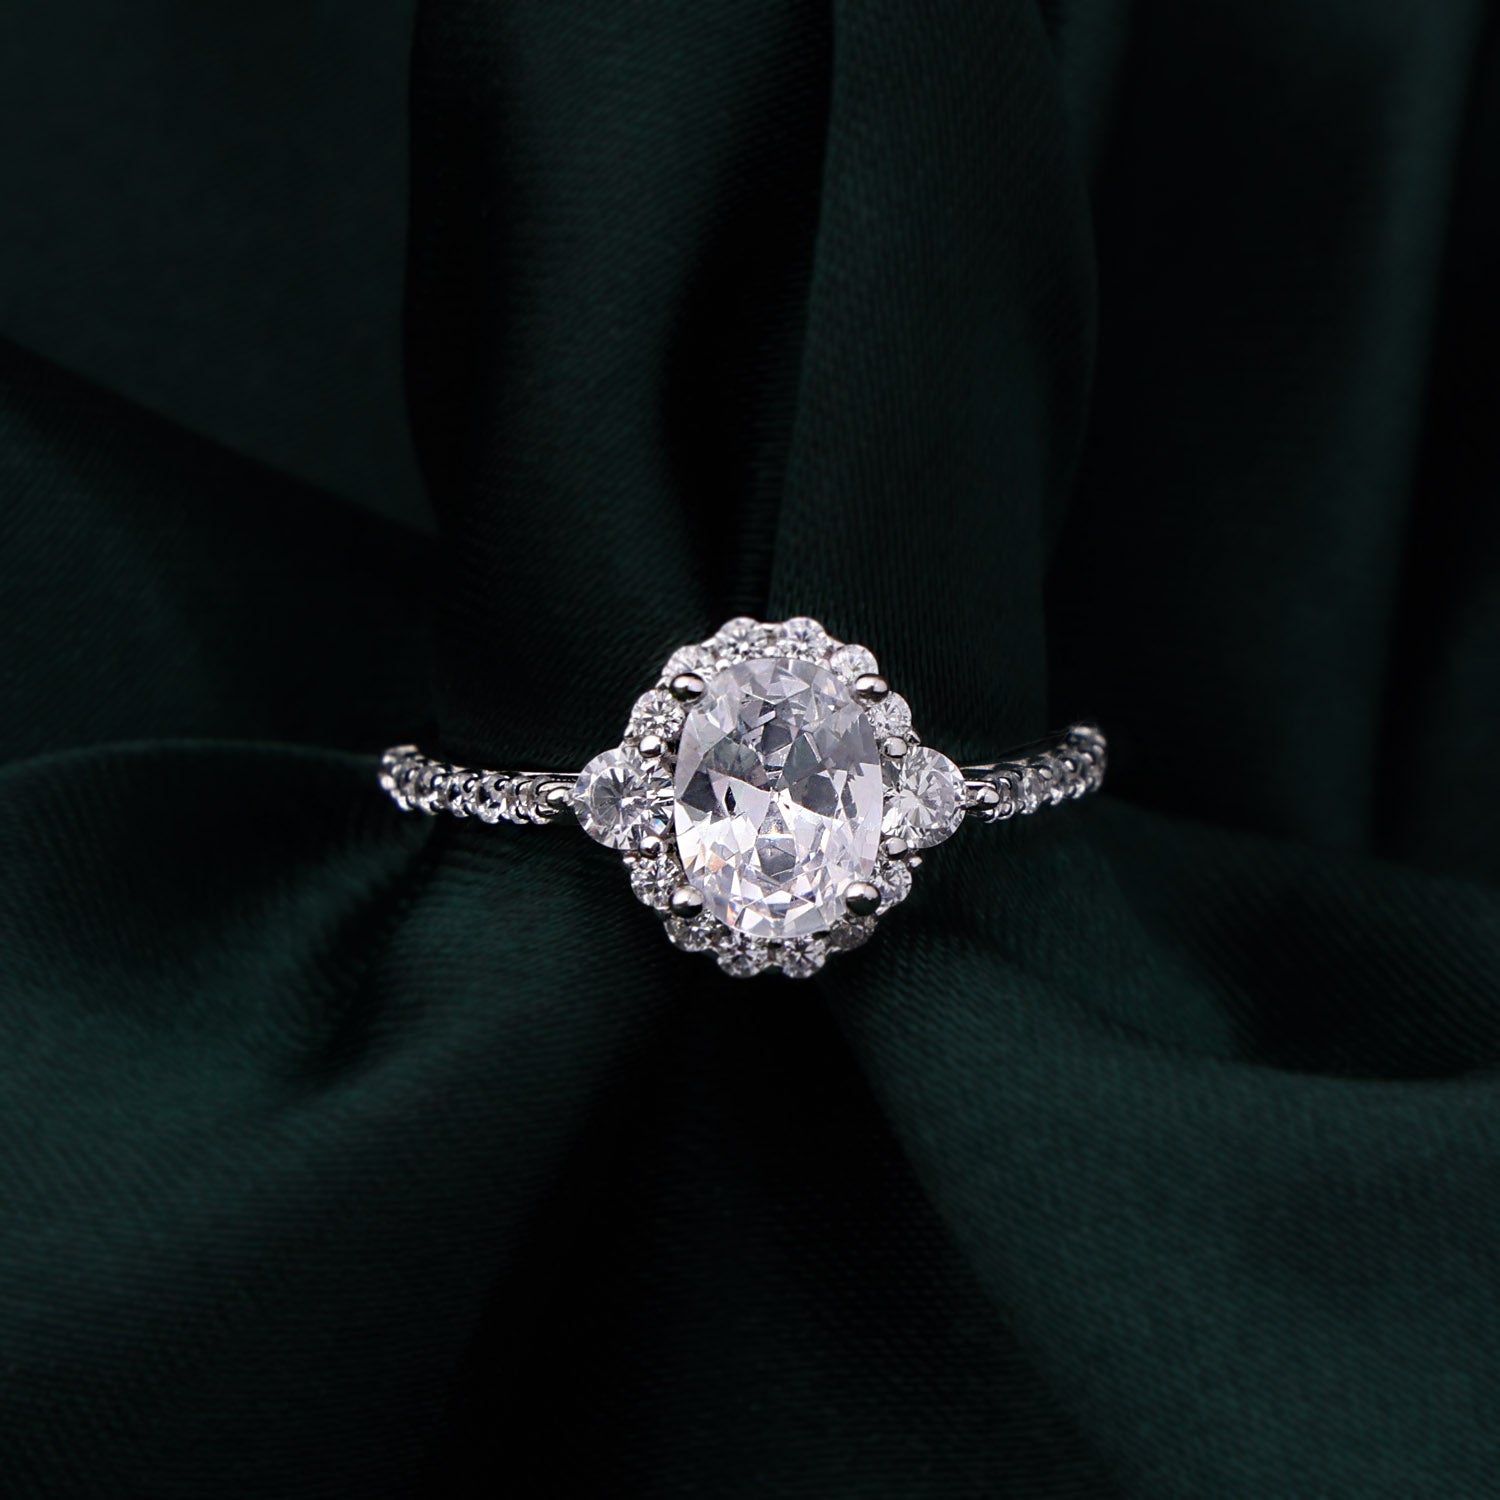 Embedded Stone Solitaire Ring | SKU: 0019211992, 0019211329, 0019212081, 0019212142